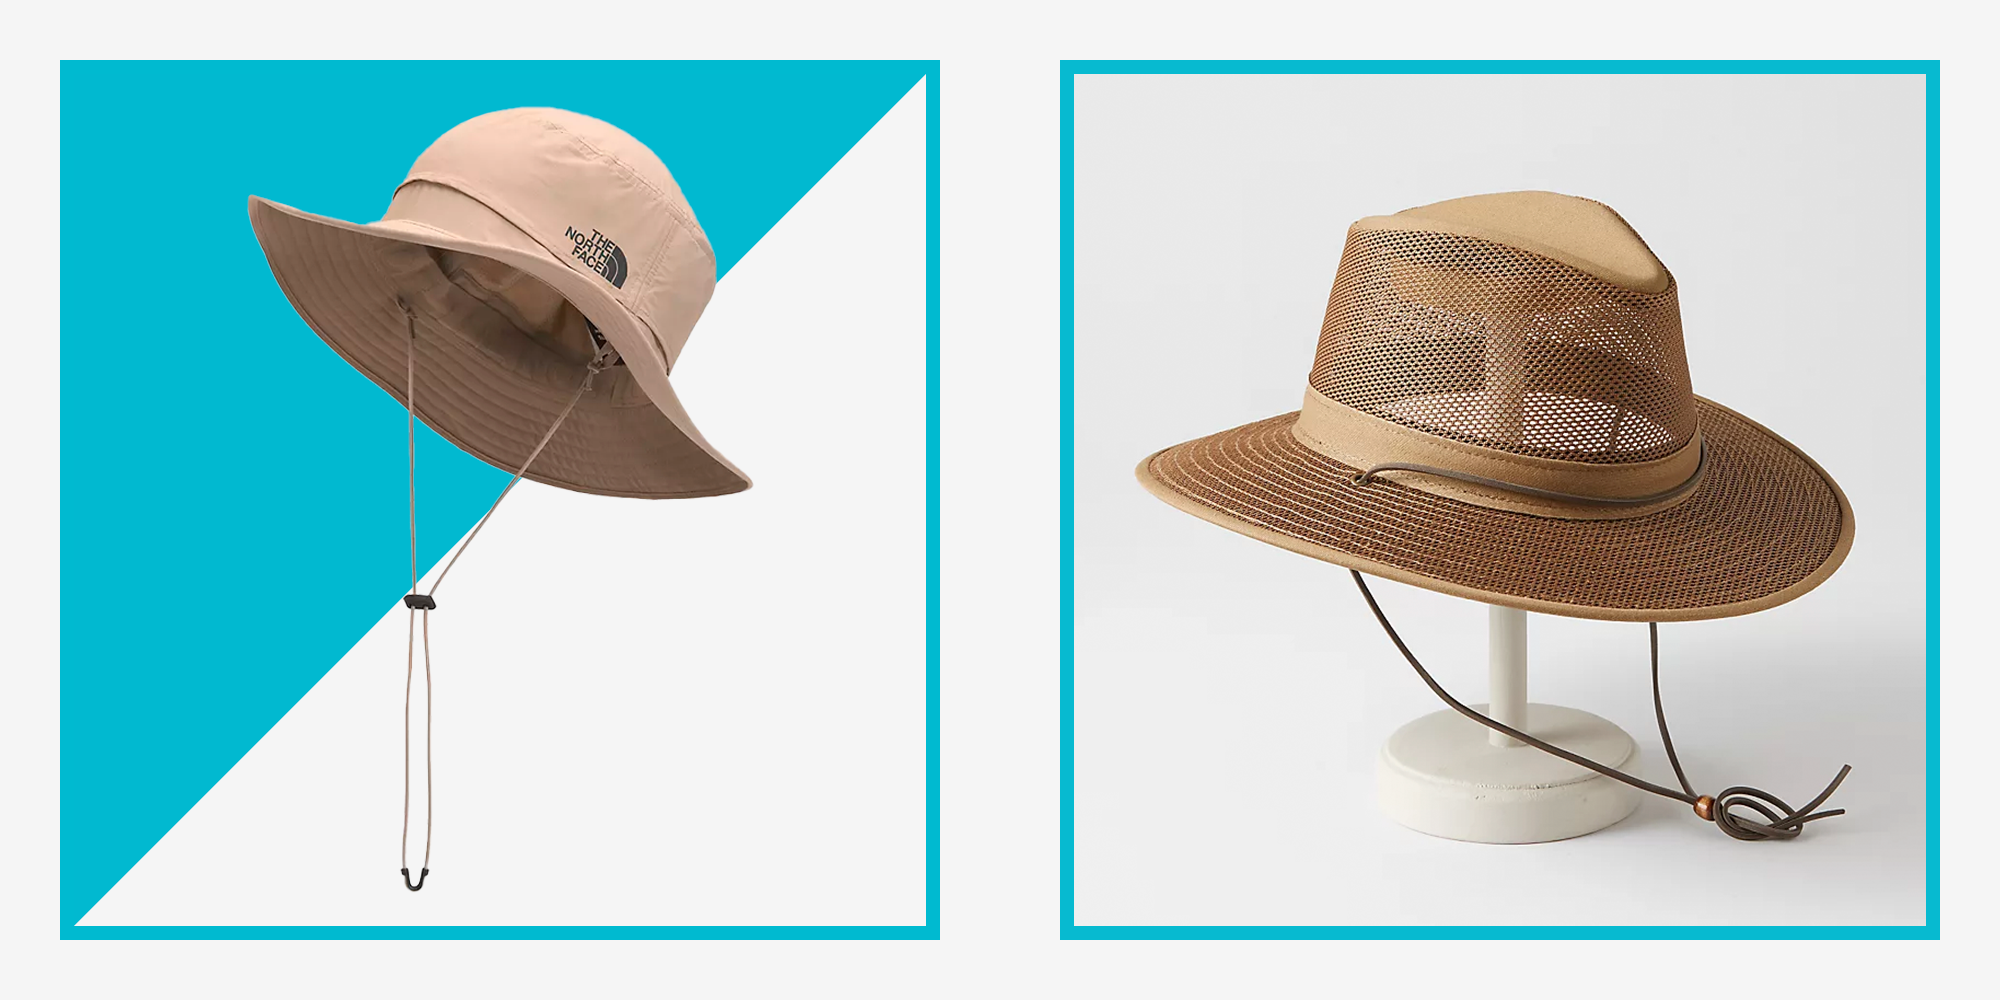 The Ventilated Brimmed Hat